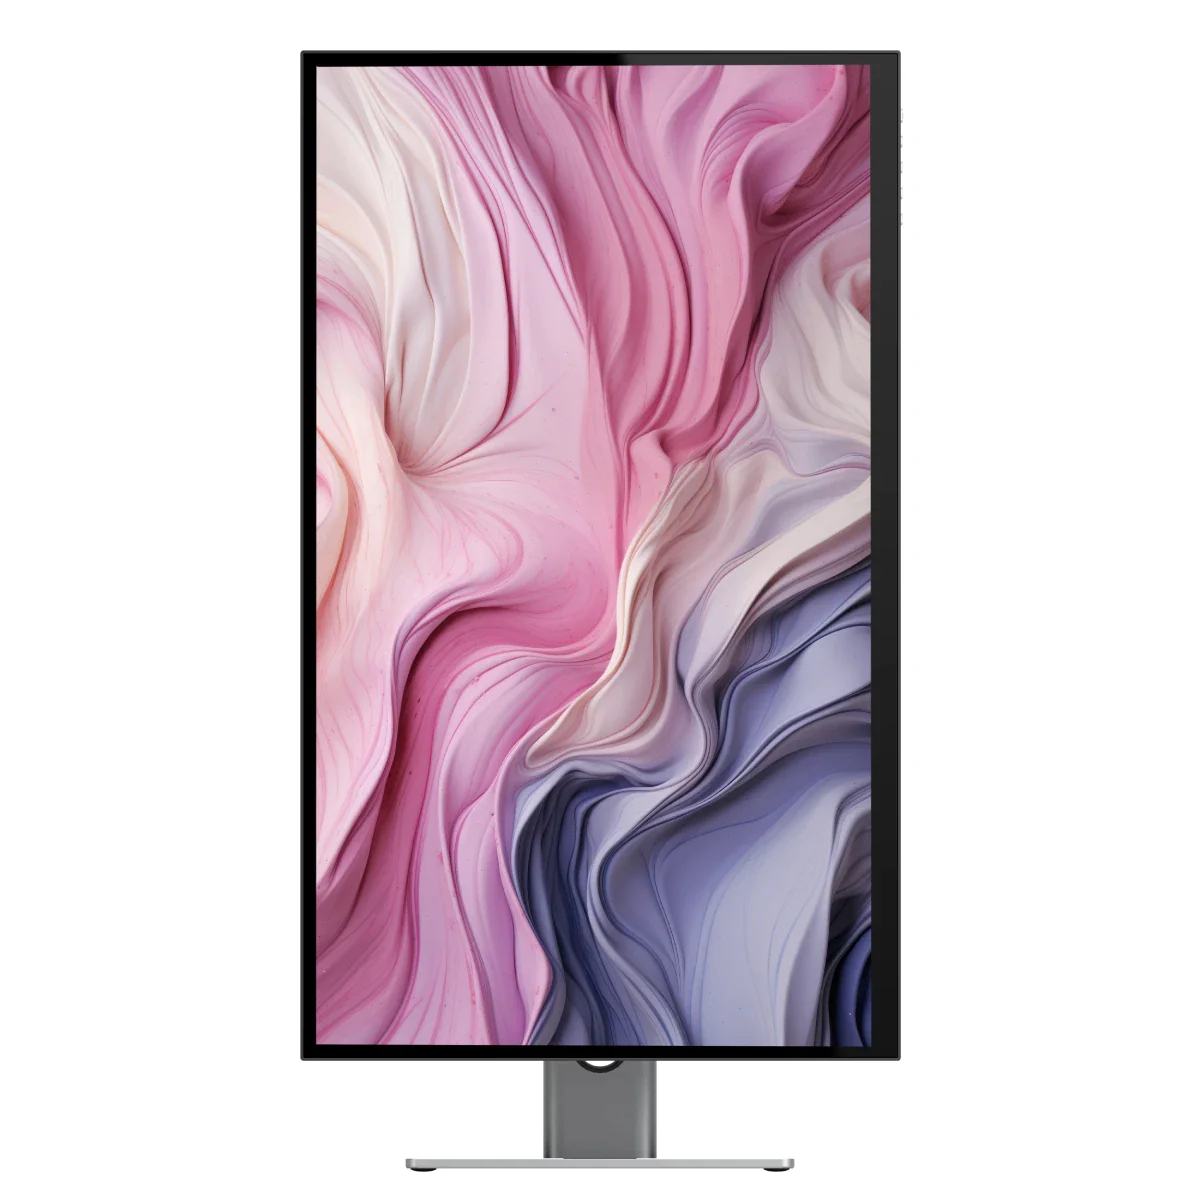 CLARITY 27"UHD 4K Monitor + Clarity Pro Touch 27" UHD 4K Monitor with 65W PD, Webcam and Touchscreen + DX2 Dual 4K Display Universal Docking Station with 65W Power Delivery